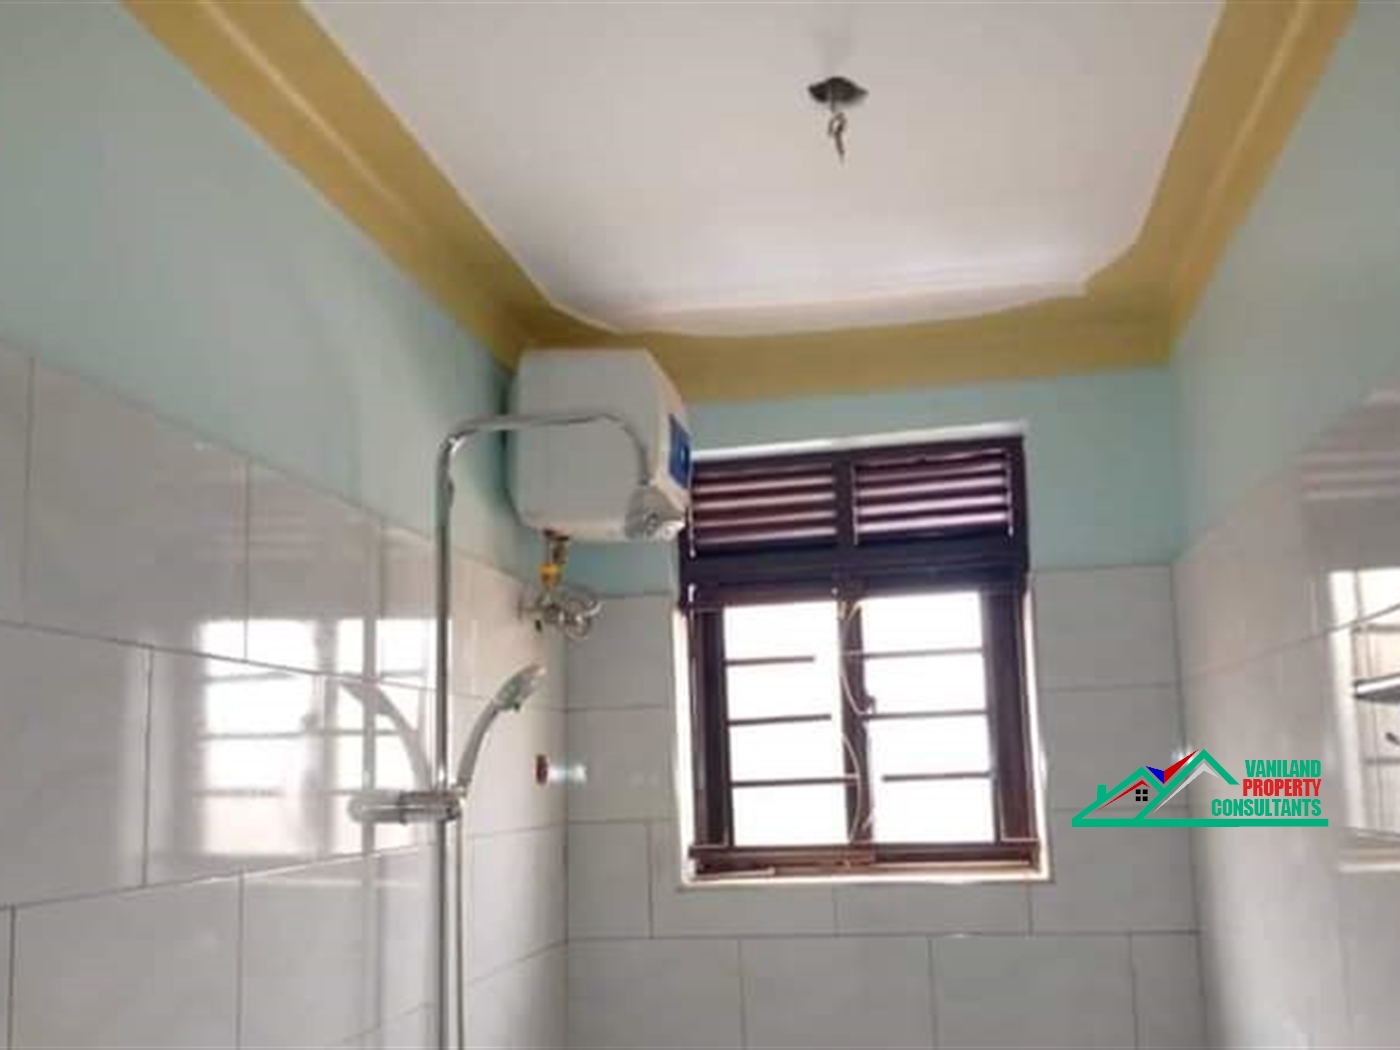 Apartment for rent in Nsasa Wakiso